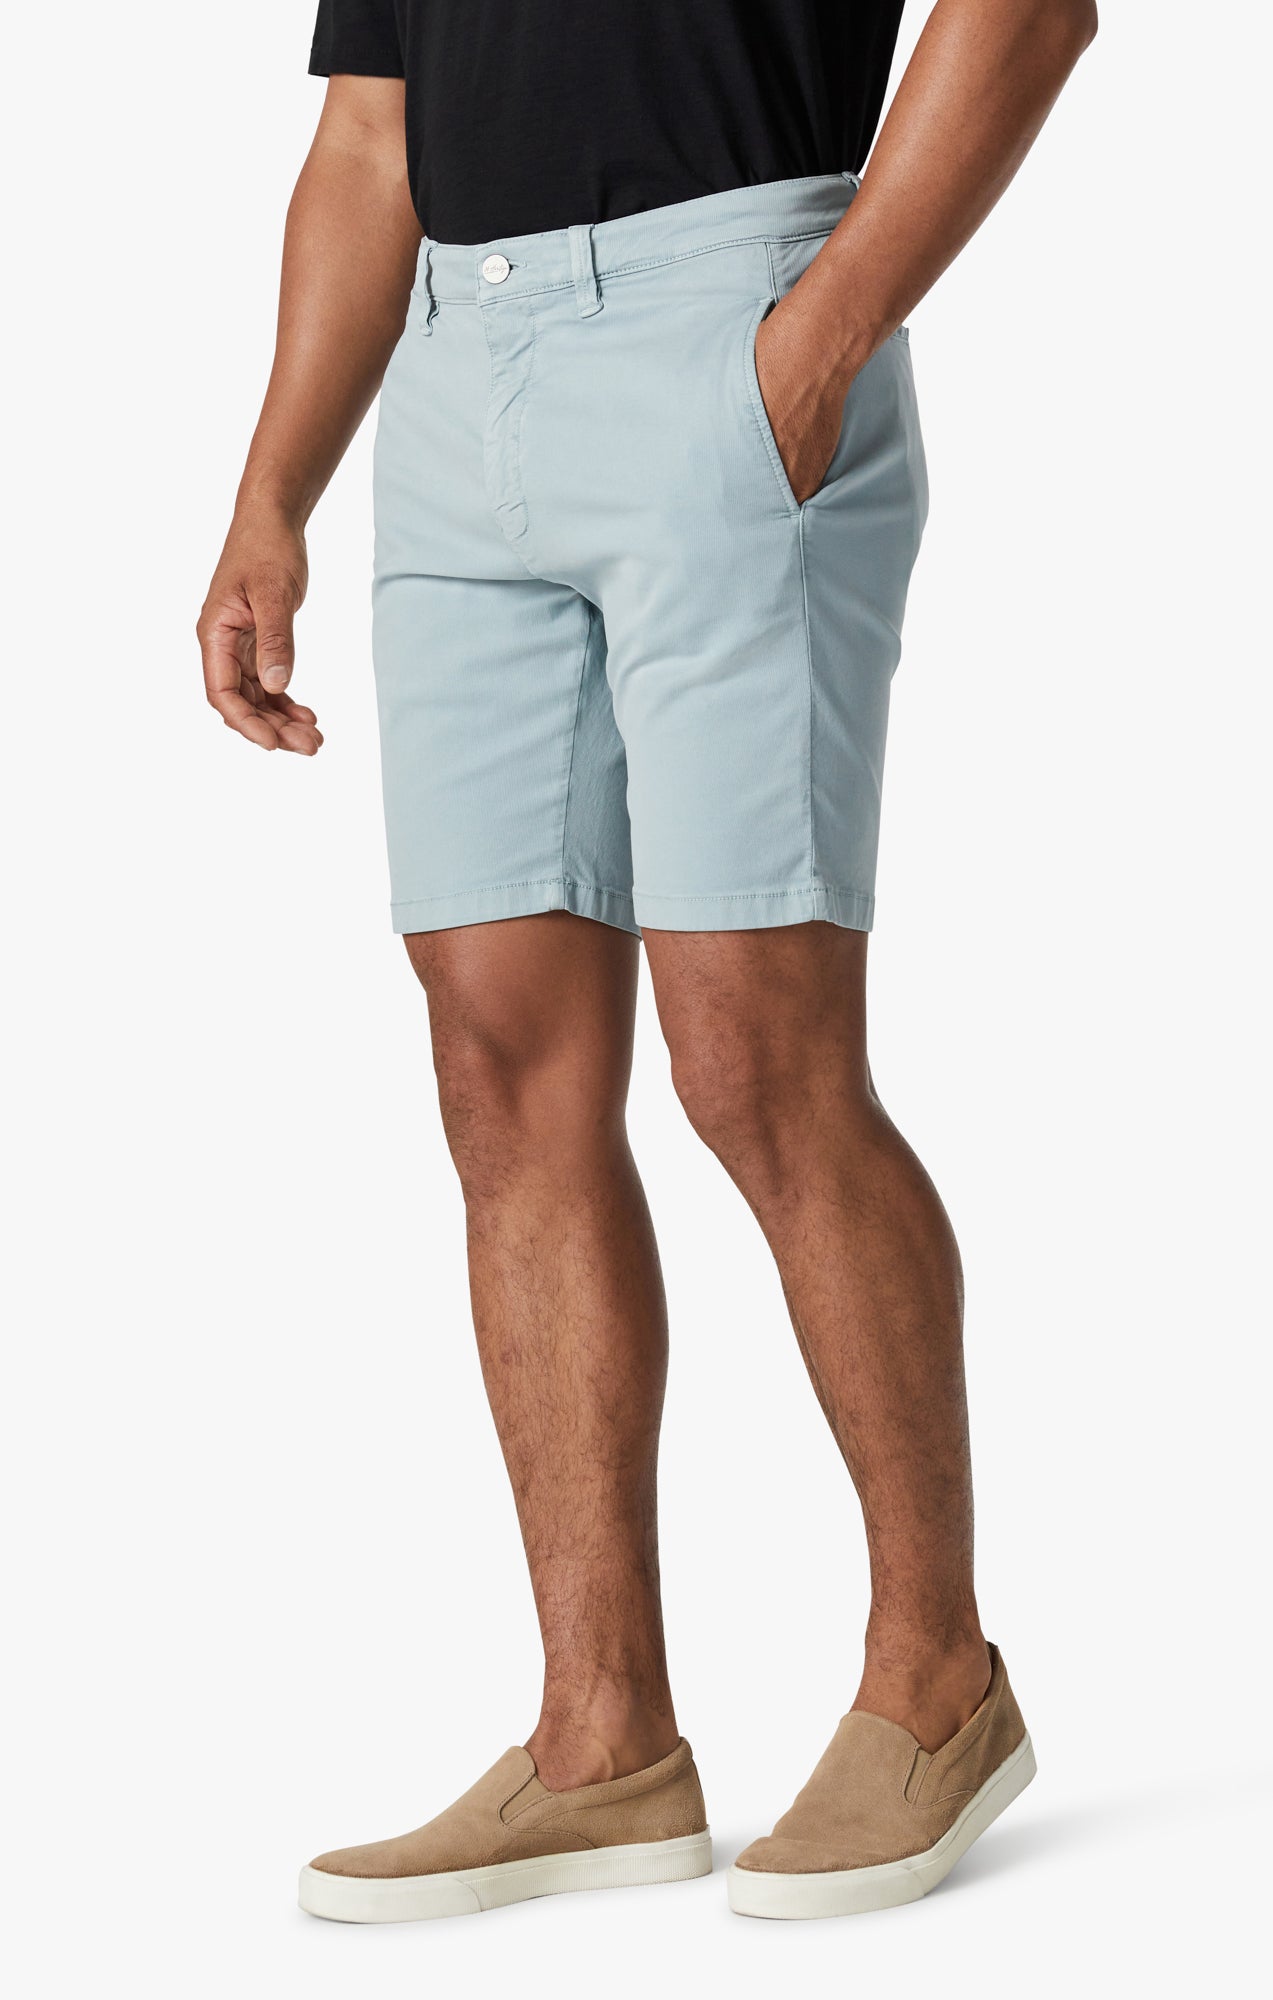 Nevada Shorts in Light Blue Soft Touch Image 4